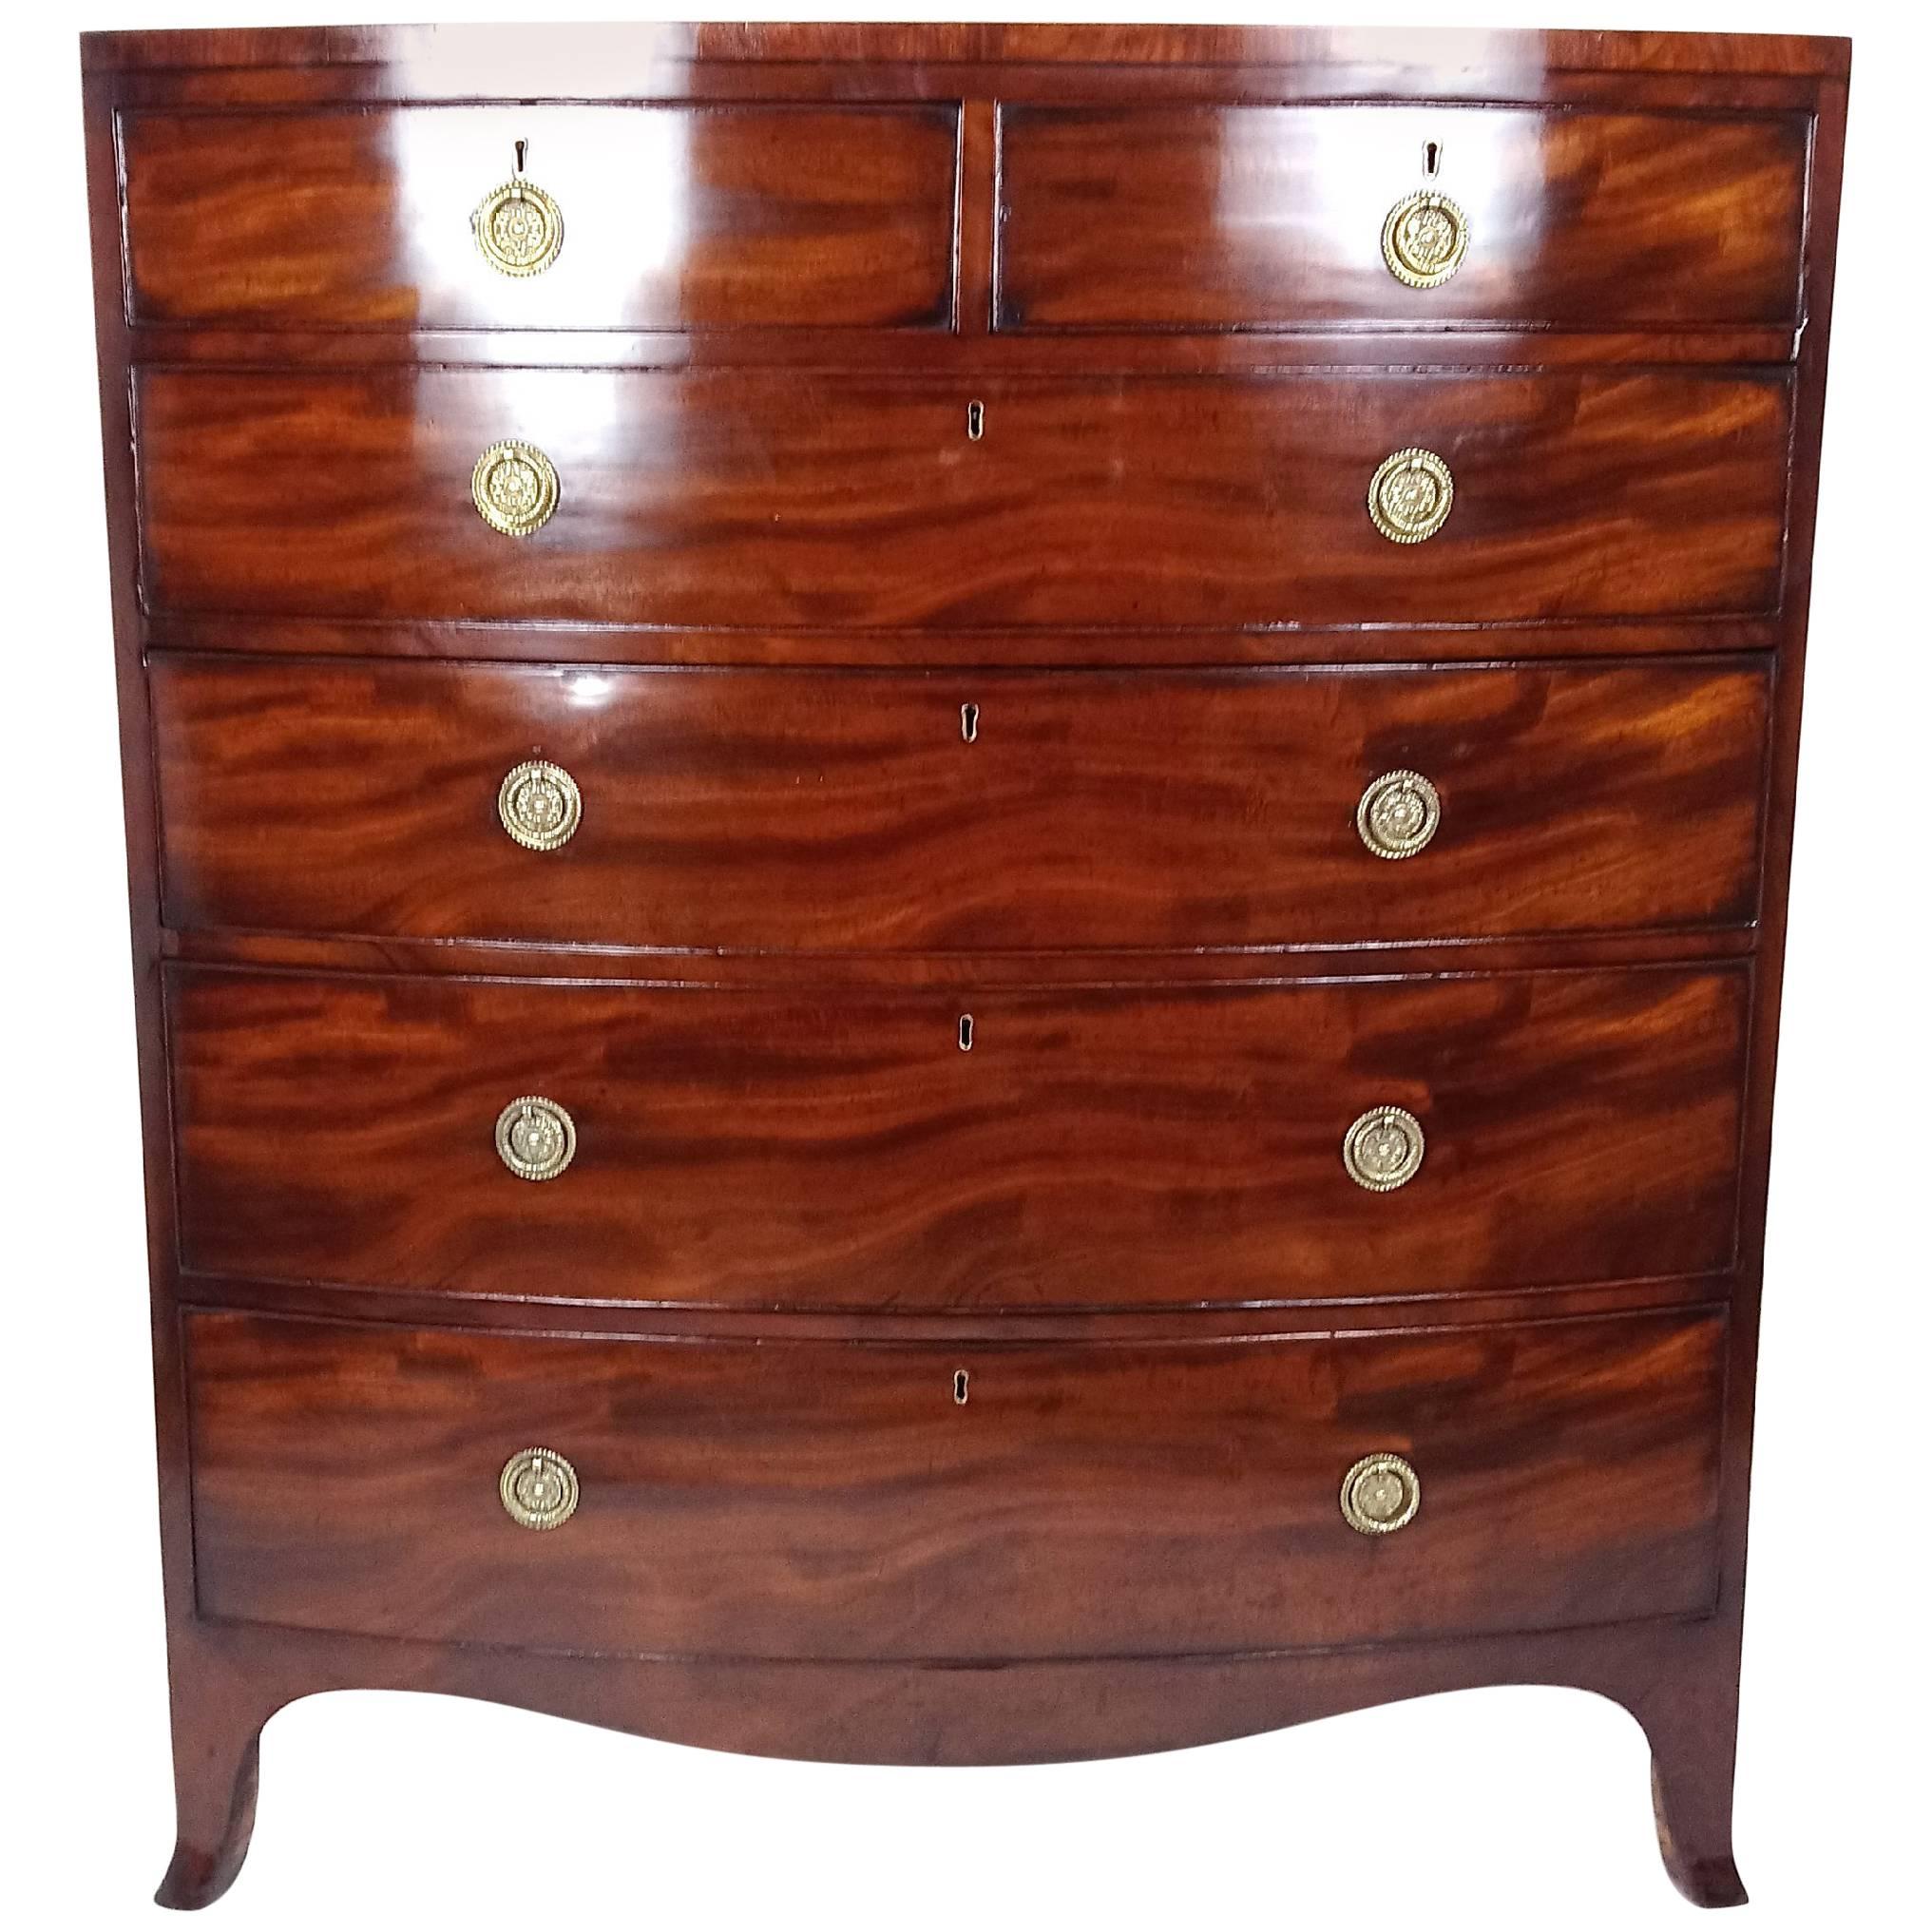 George III Large Figured Mahogany Bow Fronted Chest of Drawers